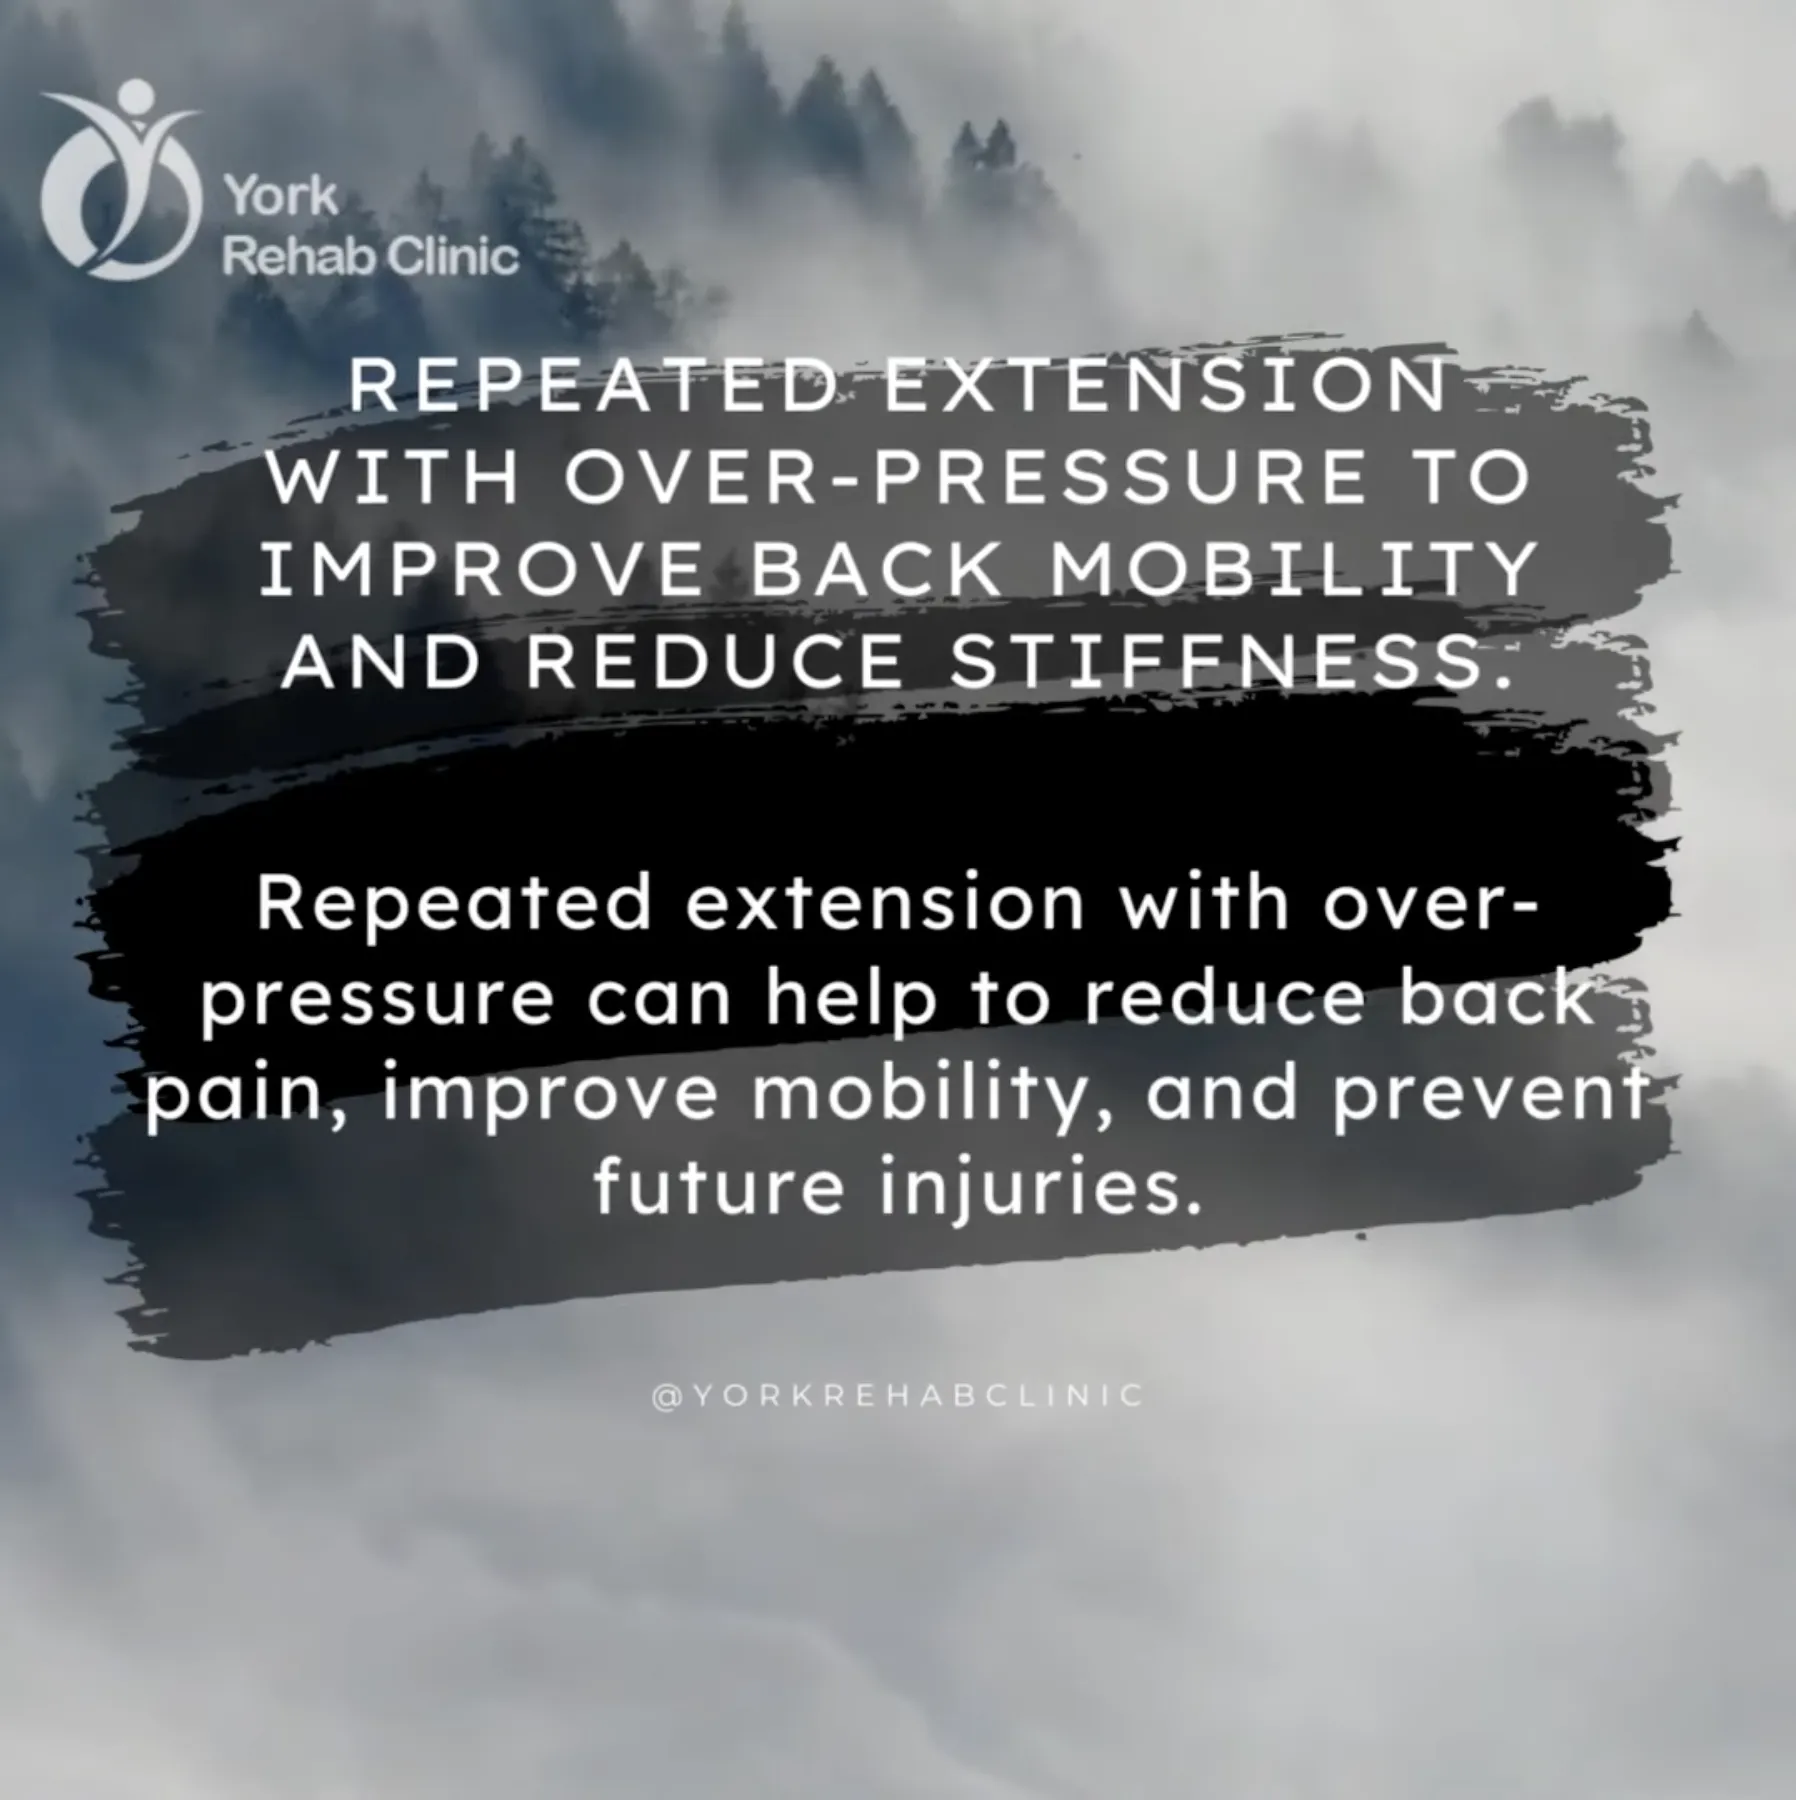 Repeated extension with over-pressure to improve back